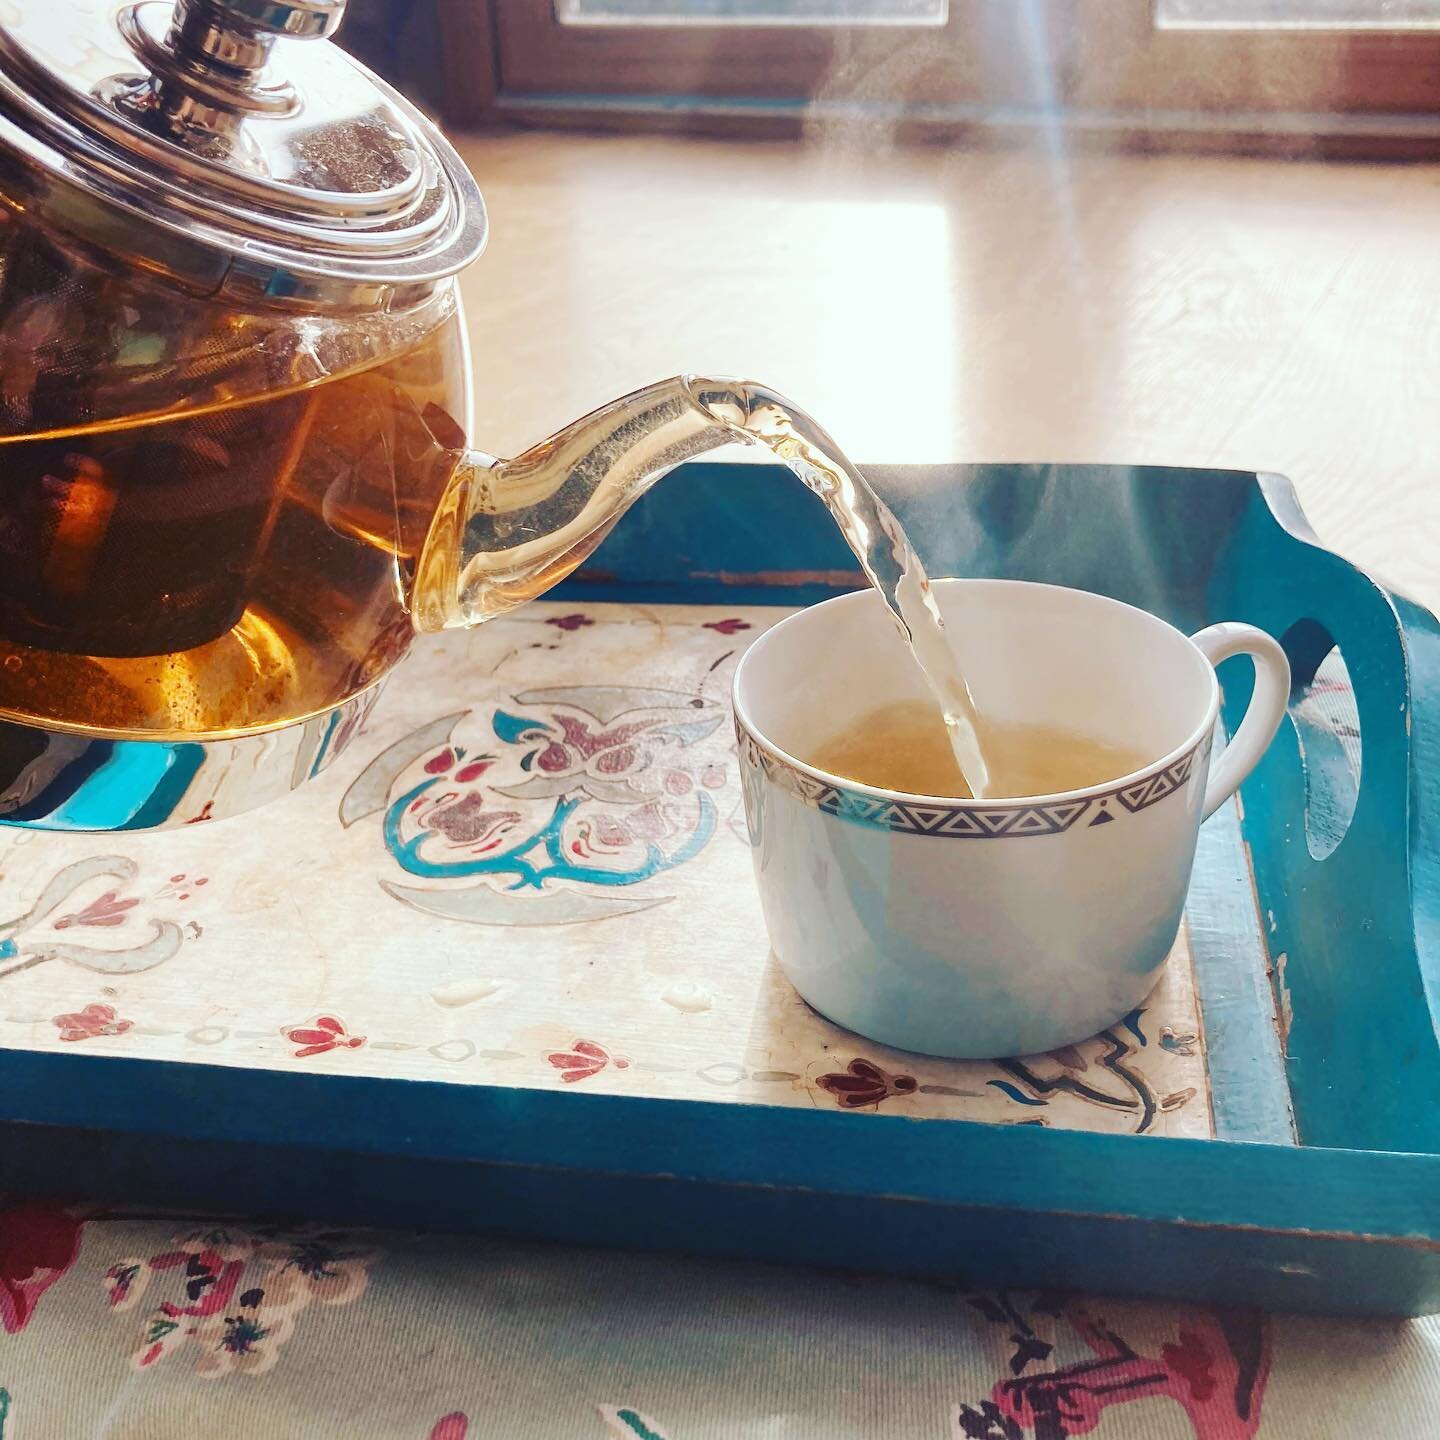 I say let the world go to hell, but I shall always have my tea 😇 Thank you Dostoyevsky for these fine wise words which can be applied to all beverages 

#wearestillhere #mentalhealth #meditation #tea #retreats #privateretreats #galway #love #solitud